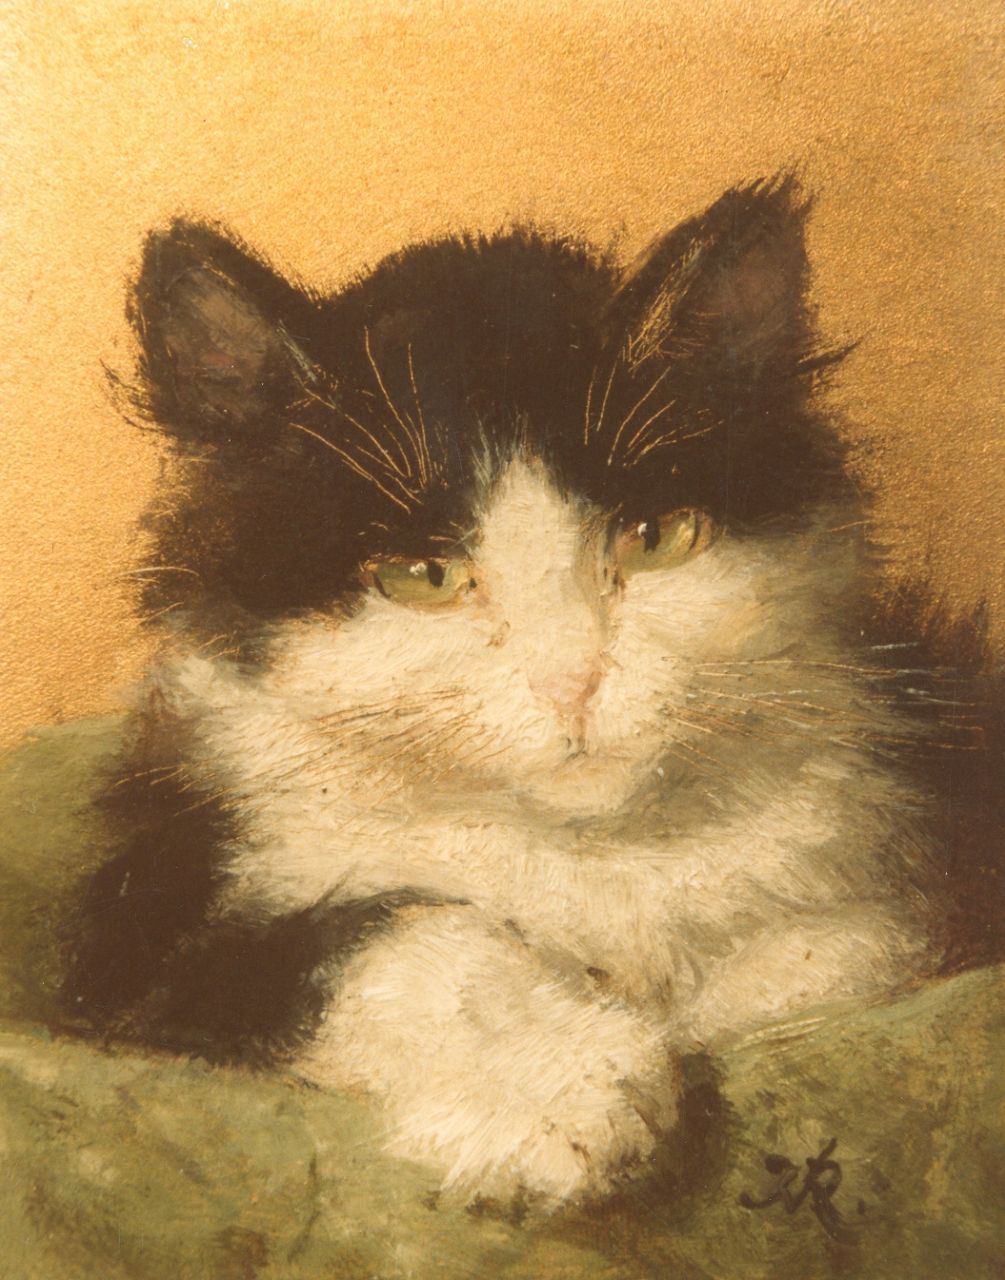 Ronner-Knip H.  | Henriette Ronner-Knip, Cat head, oil on panel 10.2 x 8.2 cm, signed lower right with monogram